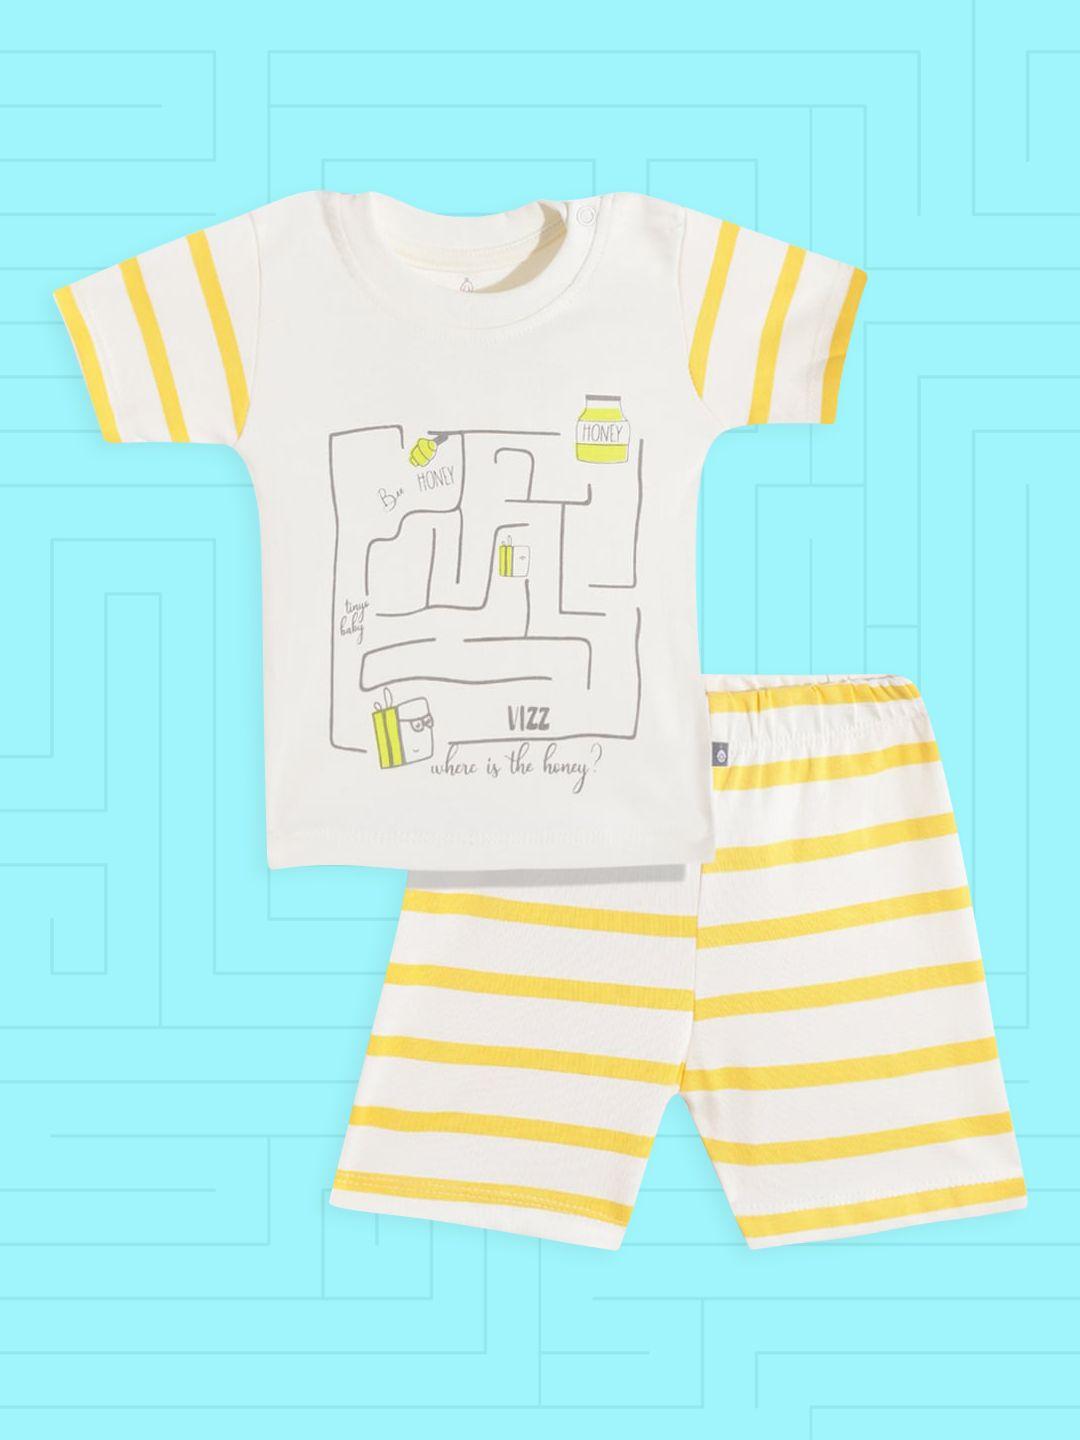 tinyo-boys-off-white-&-yellow-pure-cotton-graphic-print-t-shirt-with-shorts